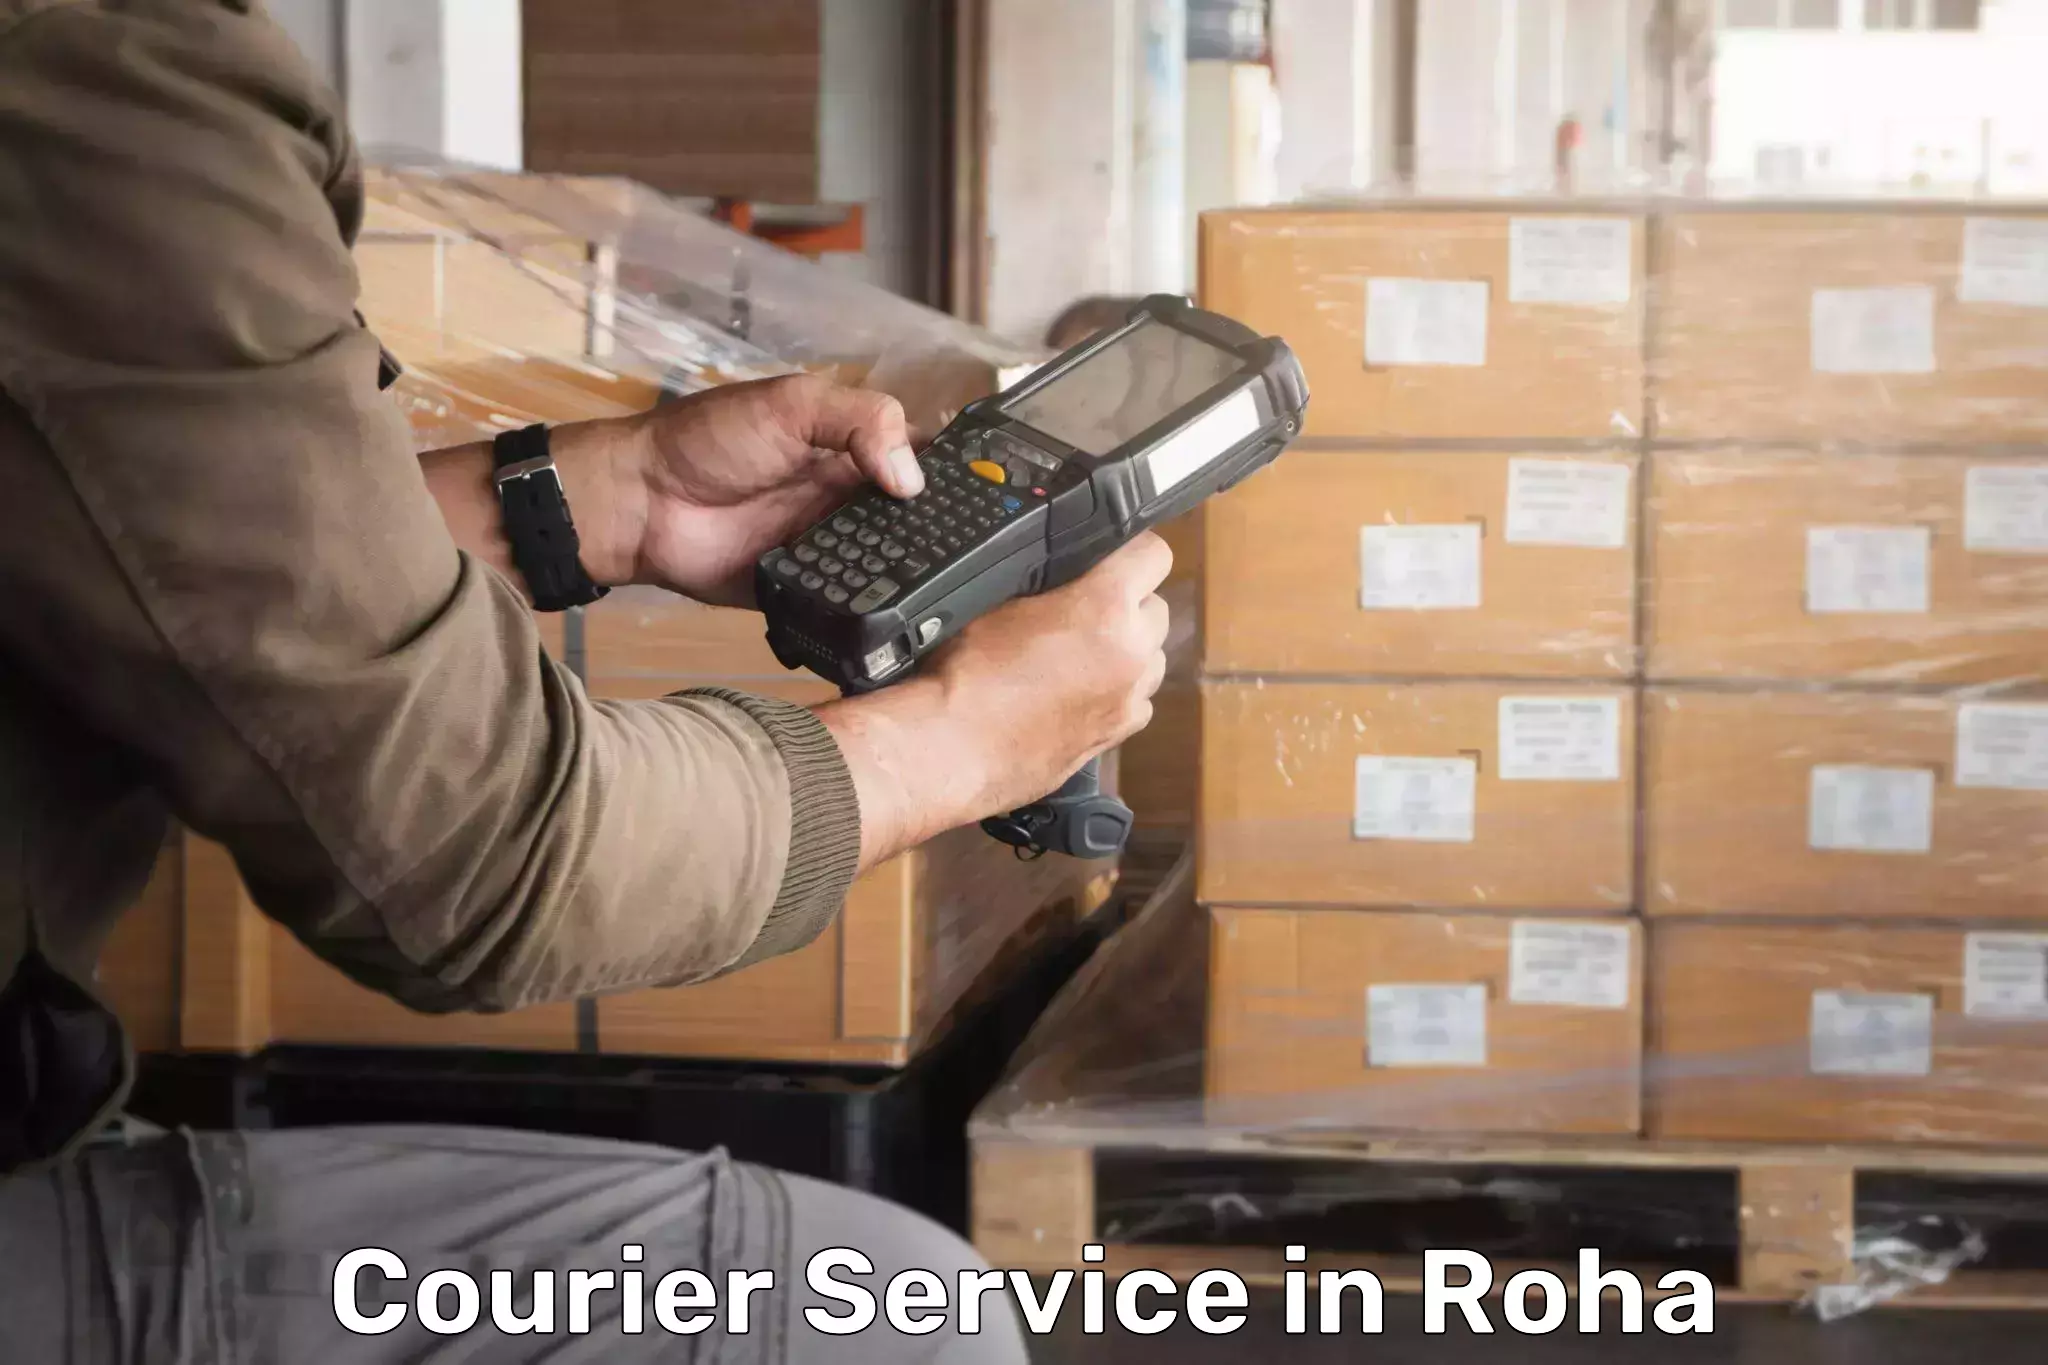 Express delivery solutions in Roha